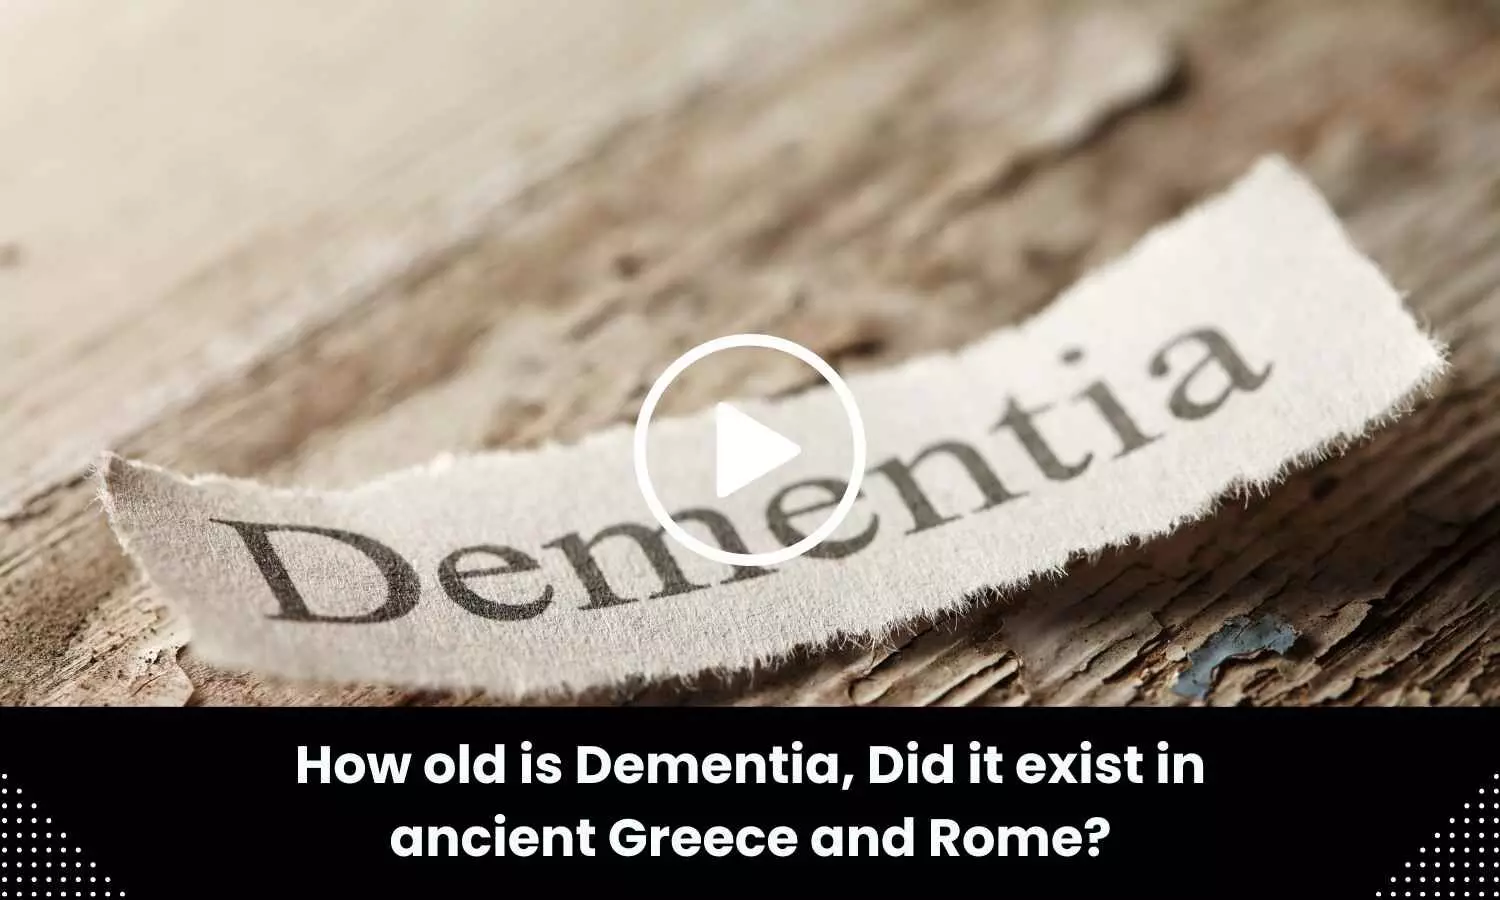 How old is Dementia, Did it exist in ancient Greece and Rome?